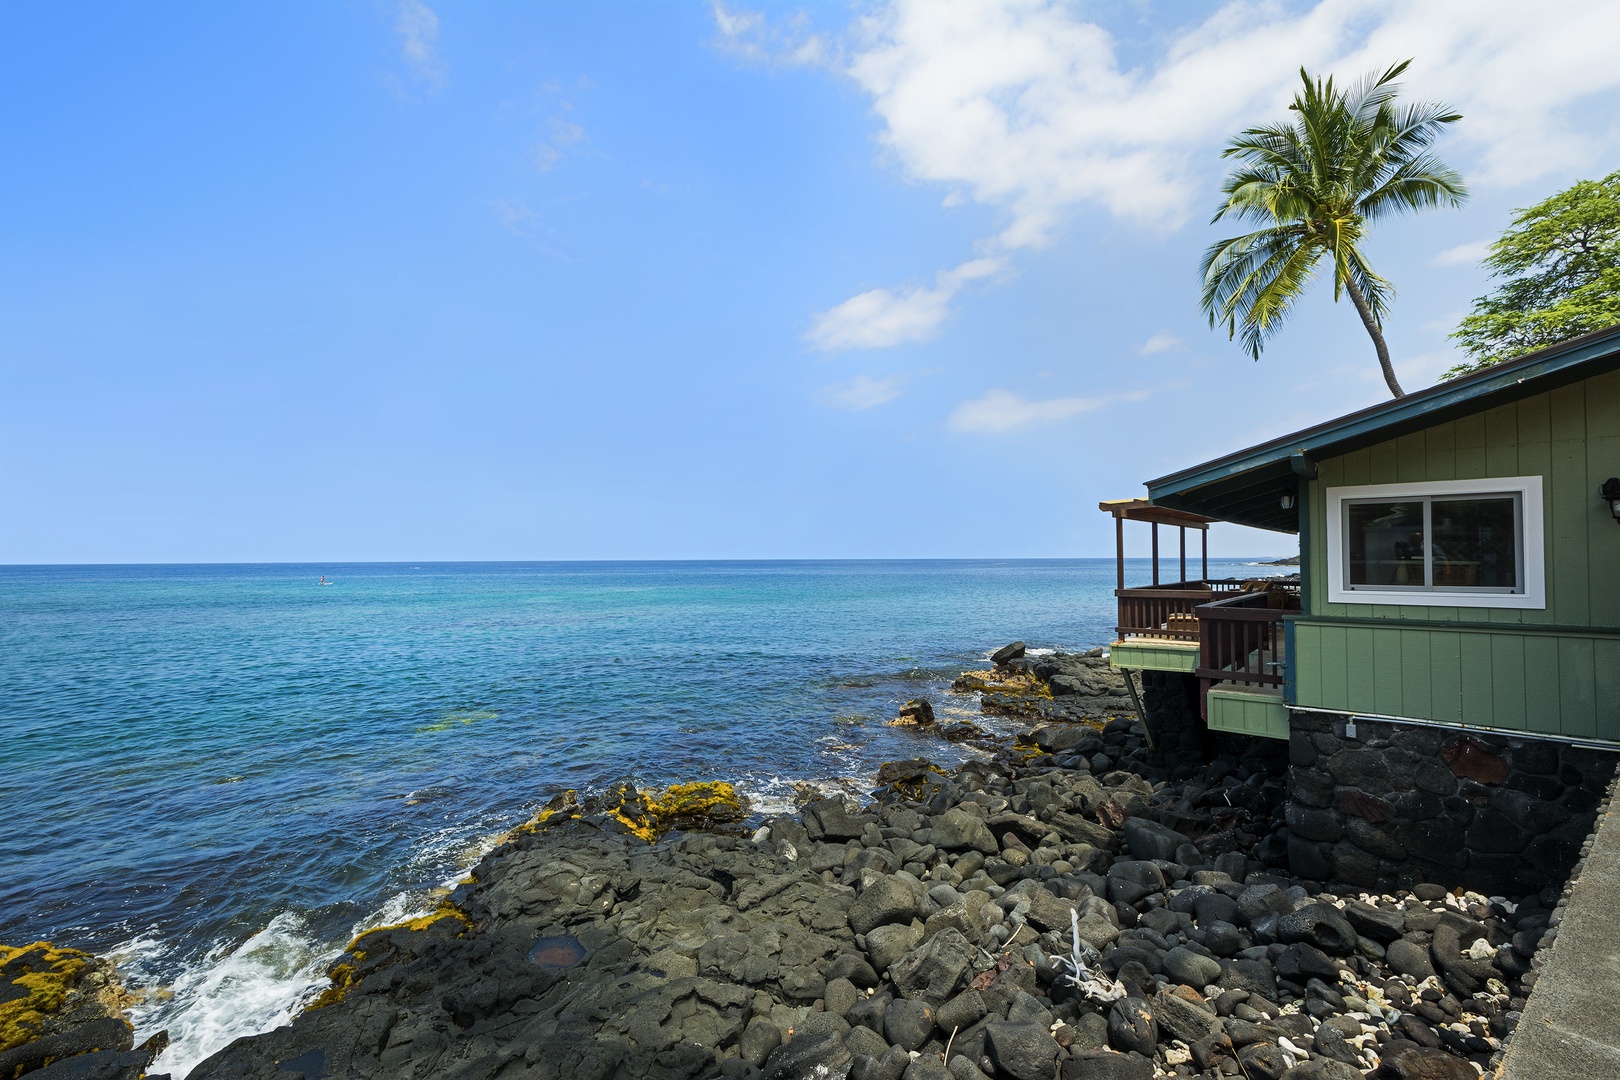 Kailua Kona Vacation Rentals, The Cottage - The lanai extends nearly into the ocean for even more breathtaking views!